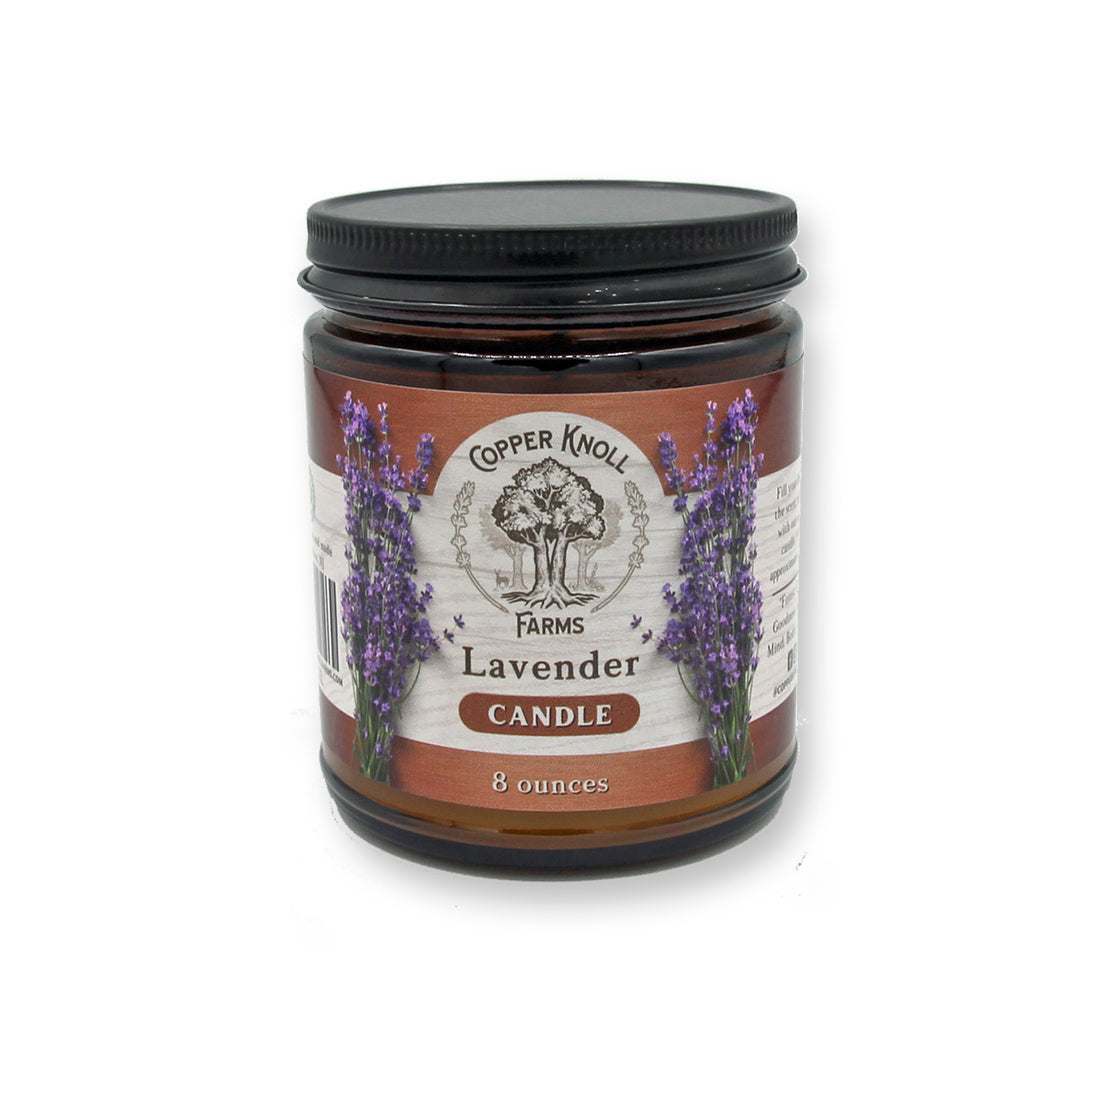 Lavender essential oil and soy blend candle in amber jar with metal lid by Copper Knoll Farms. Scented exclusively with our aromatic Lavandin essential oil that is harvested and distilled on our southern New Jersey farm. 